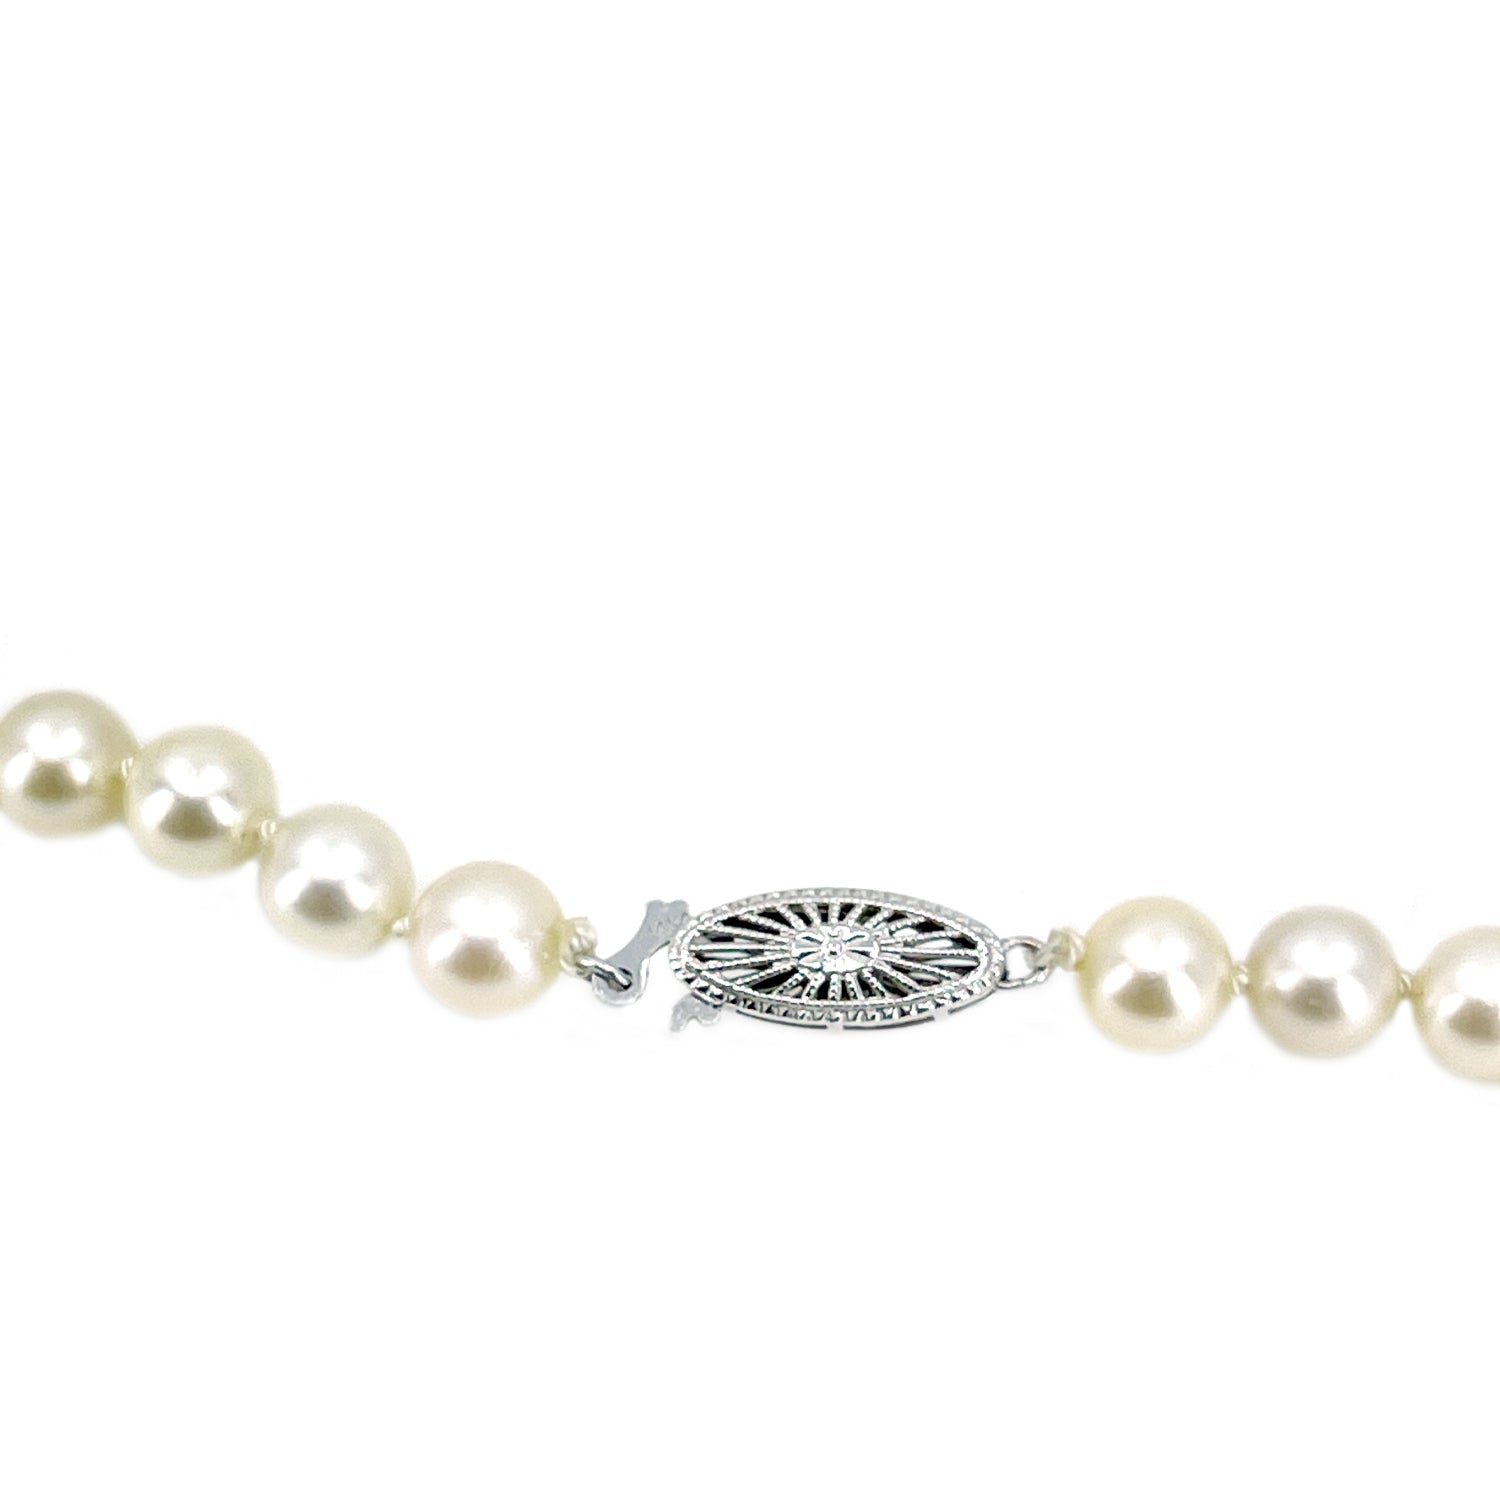 Vintage Choker Filigree Japanese Saltwater Cultured Akoya Pearl Necklace - 14K White Gold 15 Inch